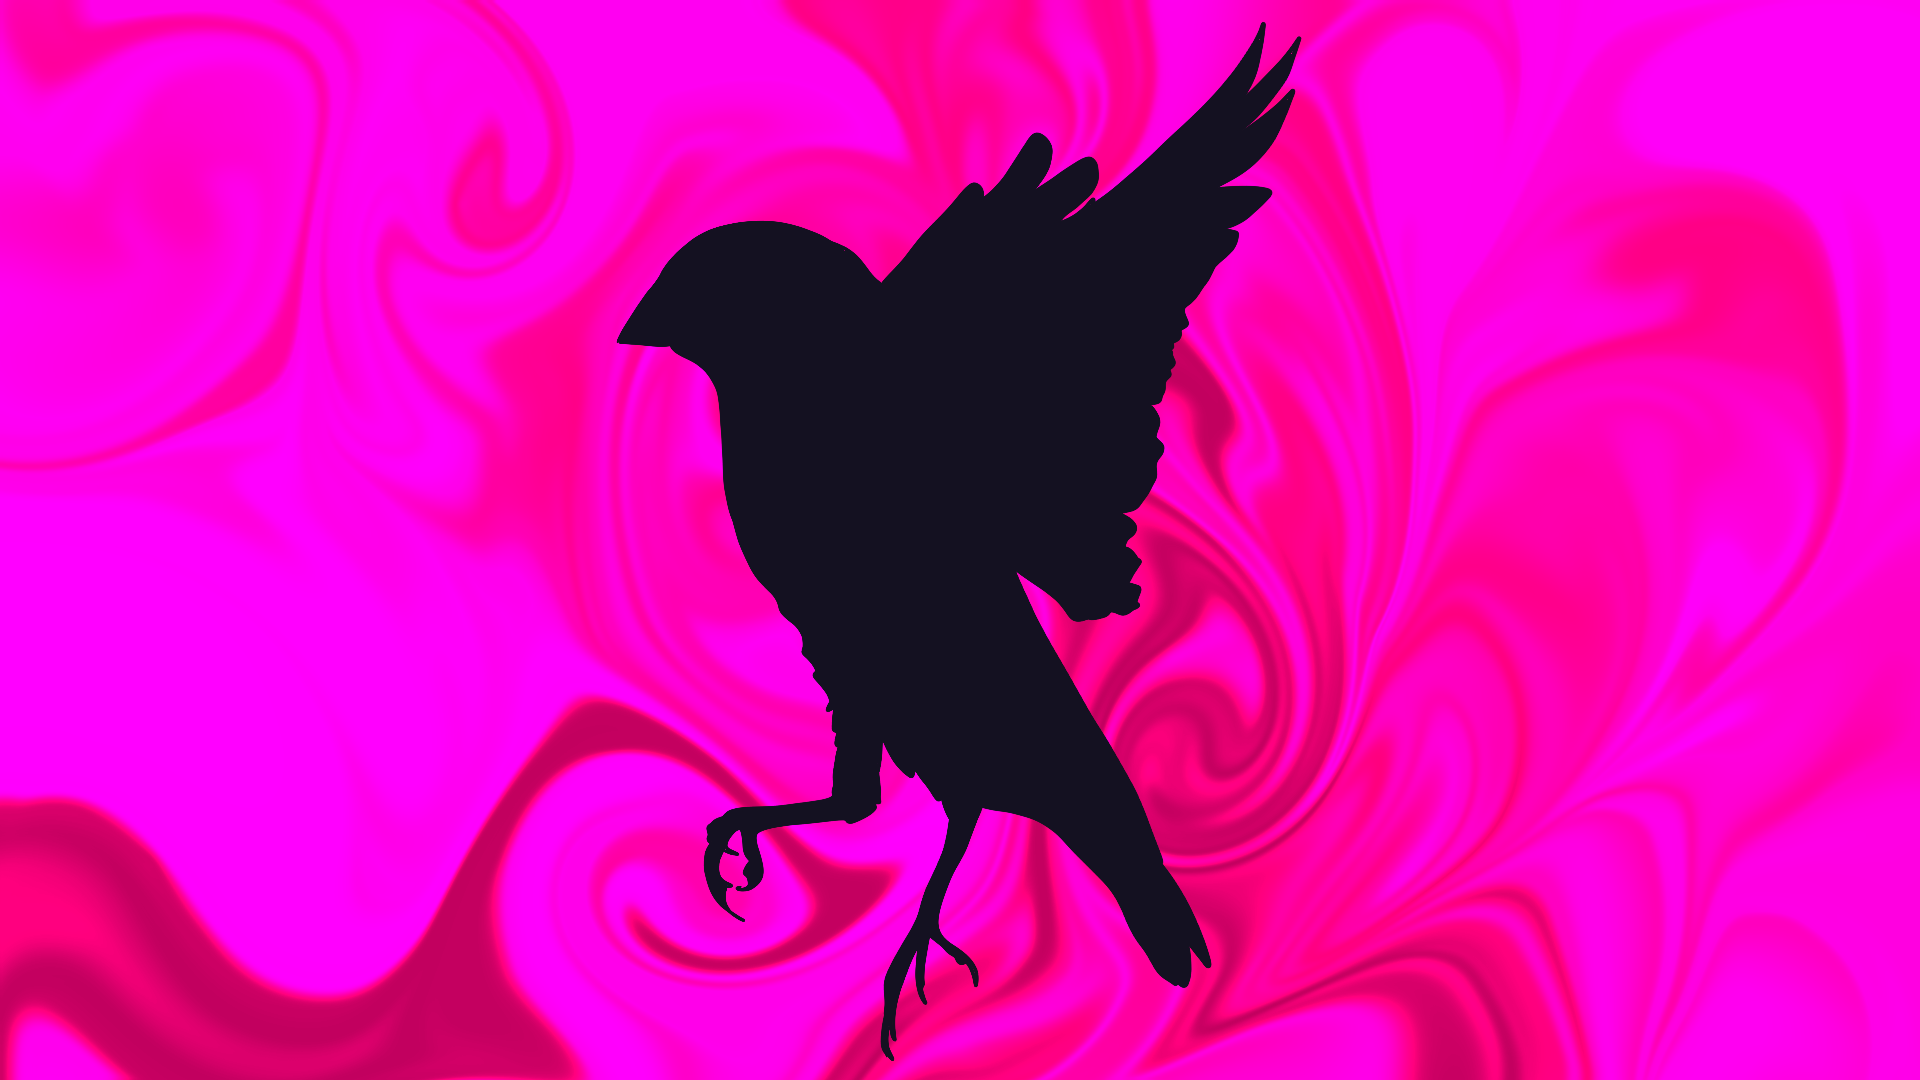 Image of a bird's silhouette over pink marble print